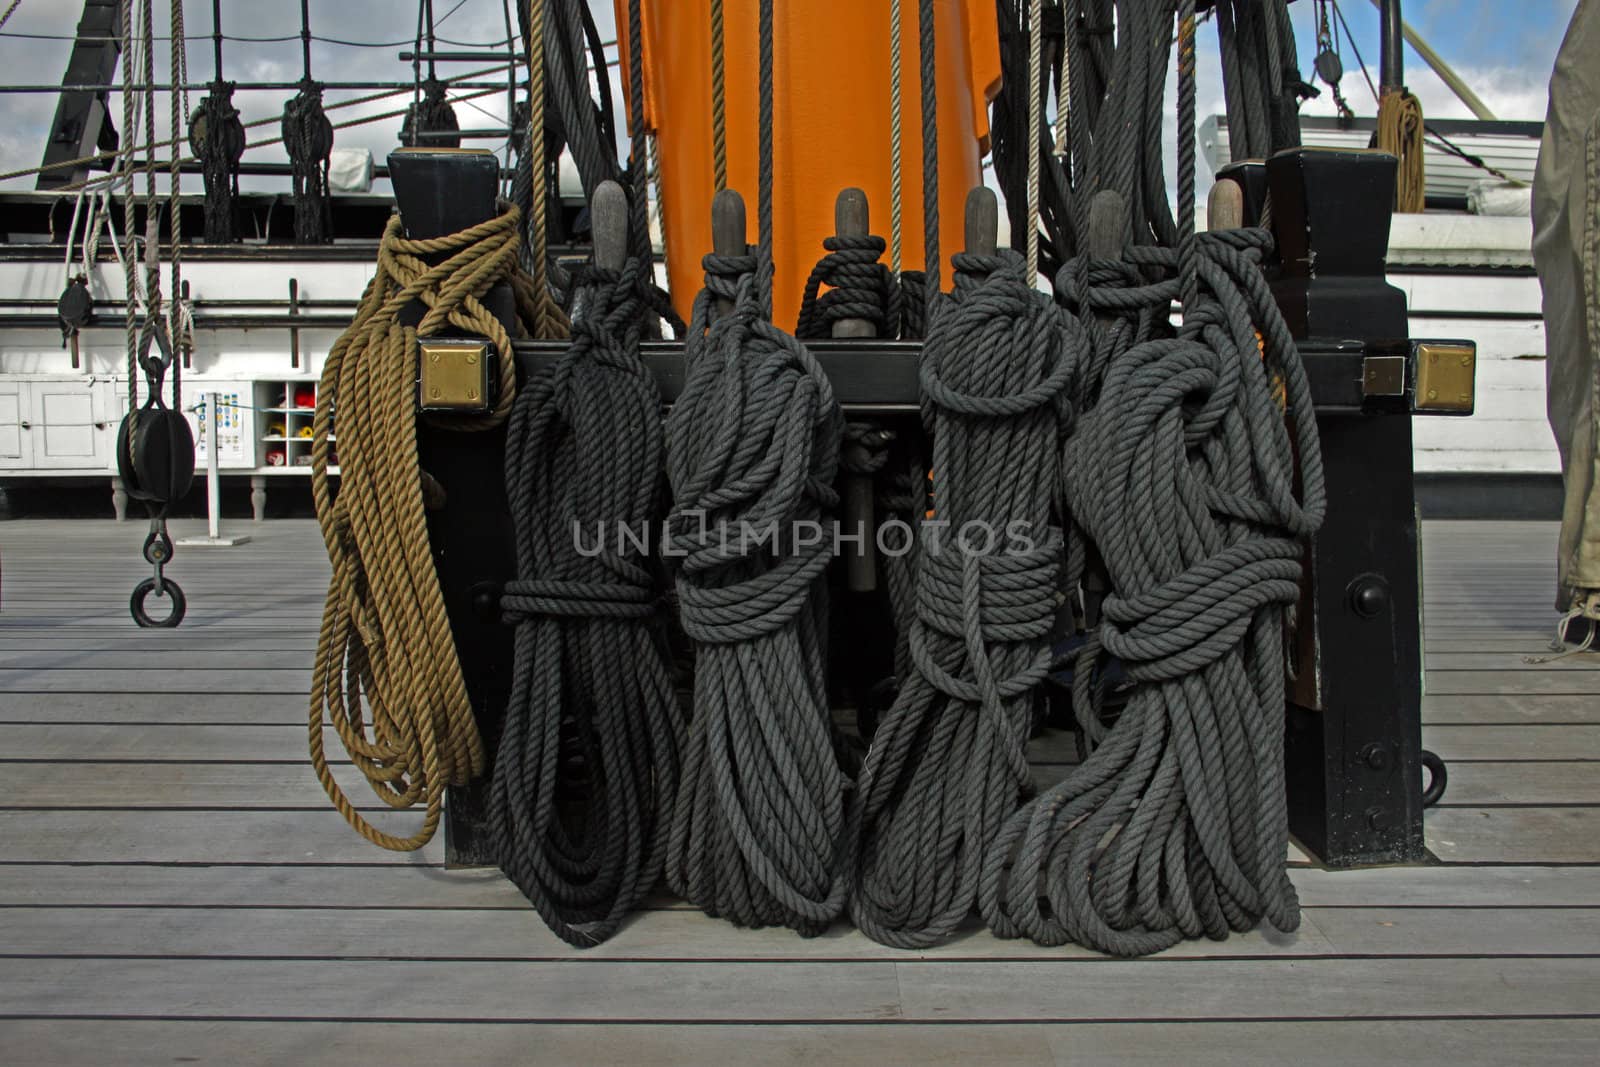 Rigging rope from the deck of the HMS Warrior